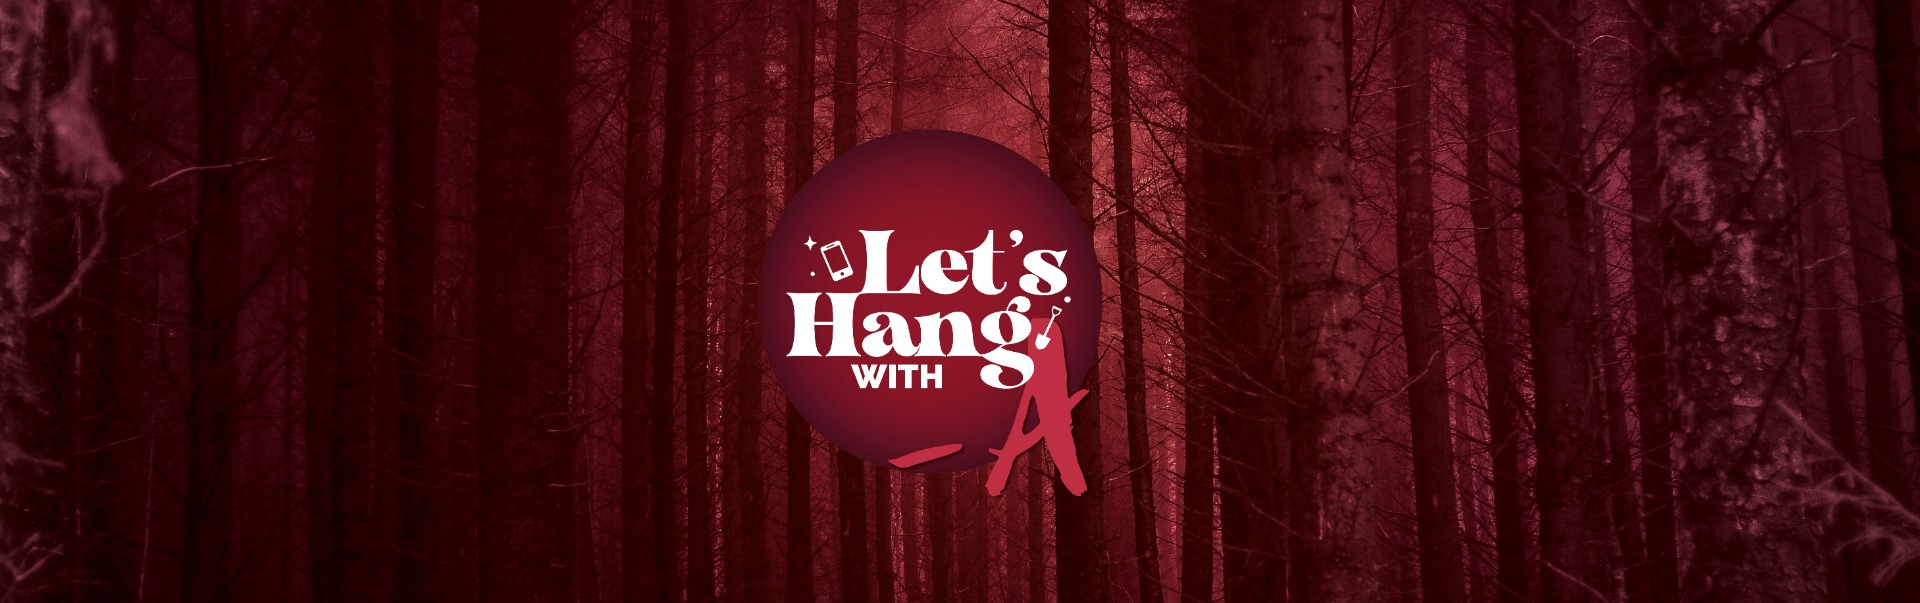 Let's Hang With -A